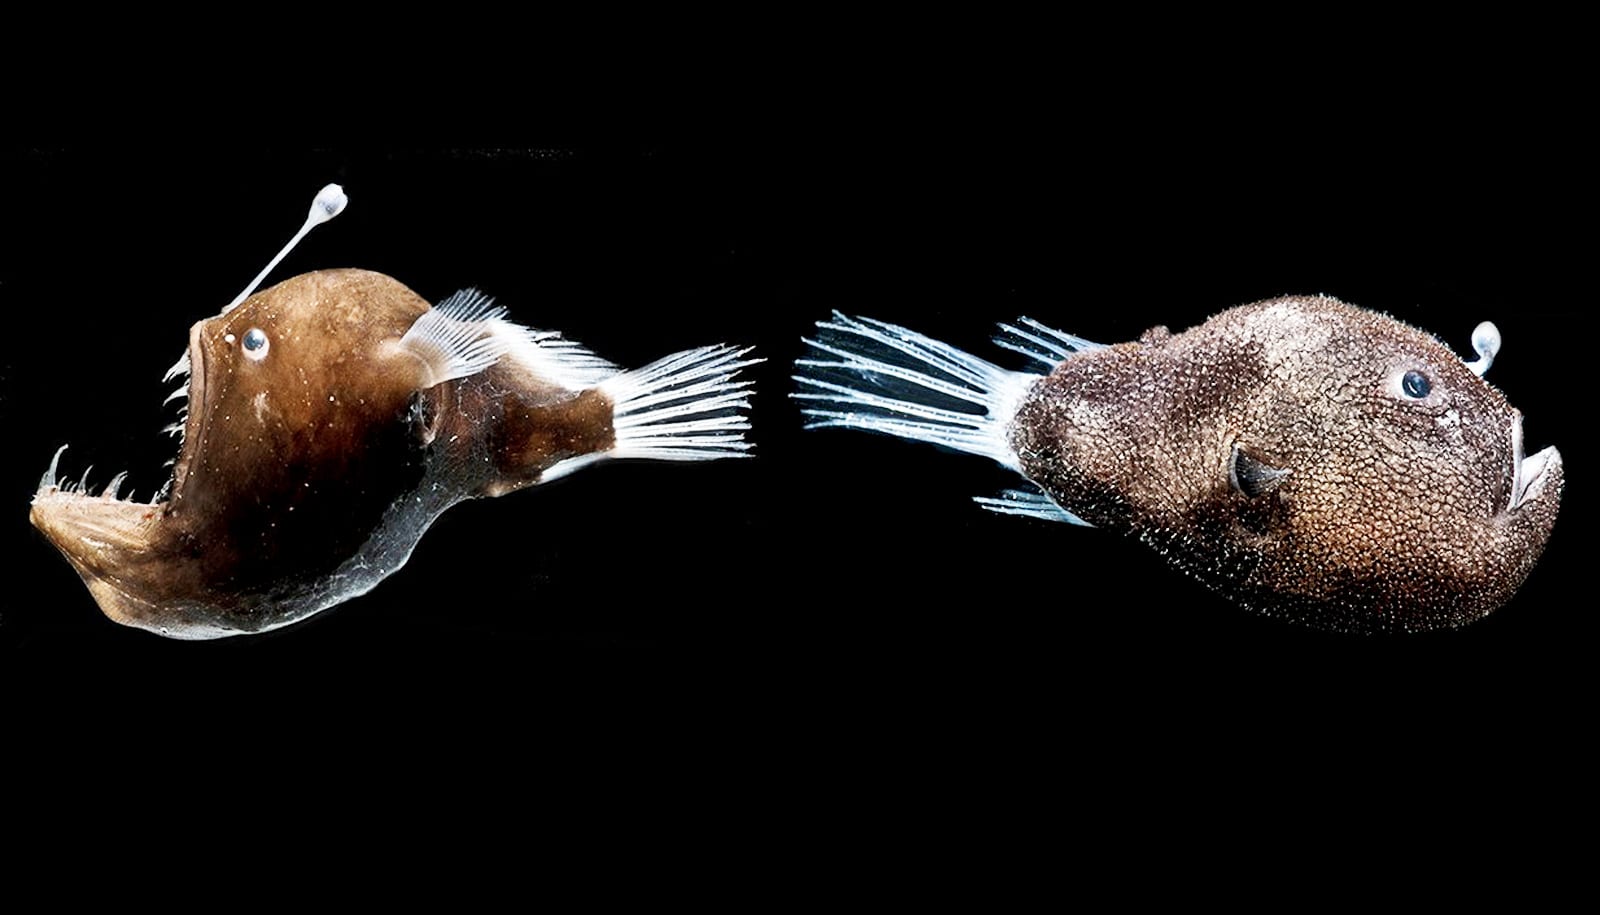 Anglerfish and their headlamp bacteria have a crazy relationship - Futurity